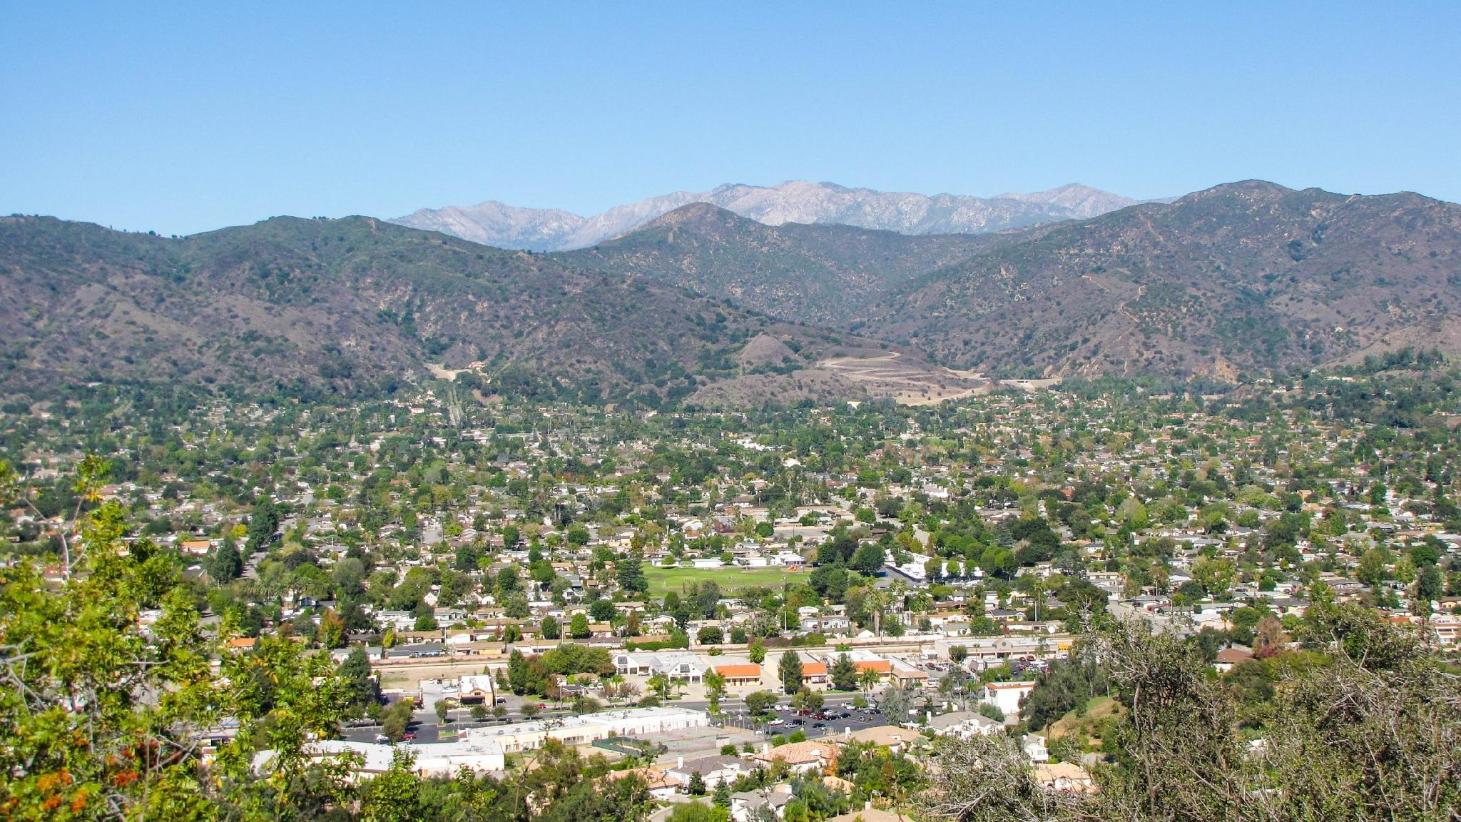 Welcome to Glendora, CA: The Pride of the Foothills